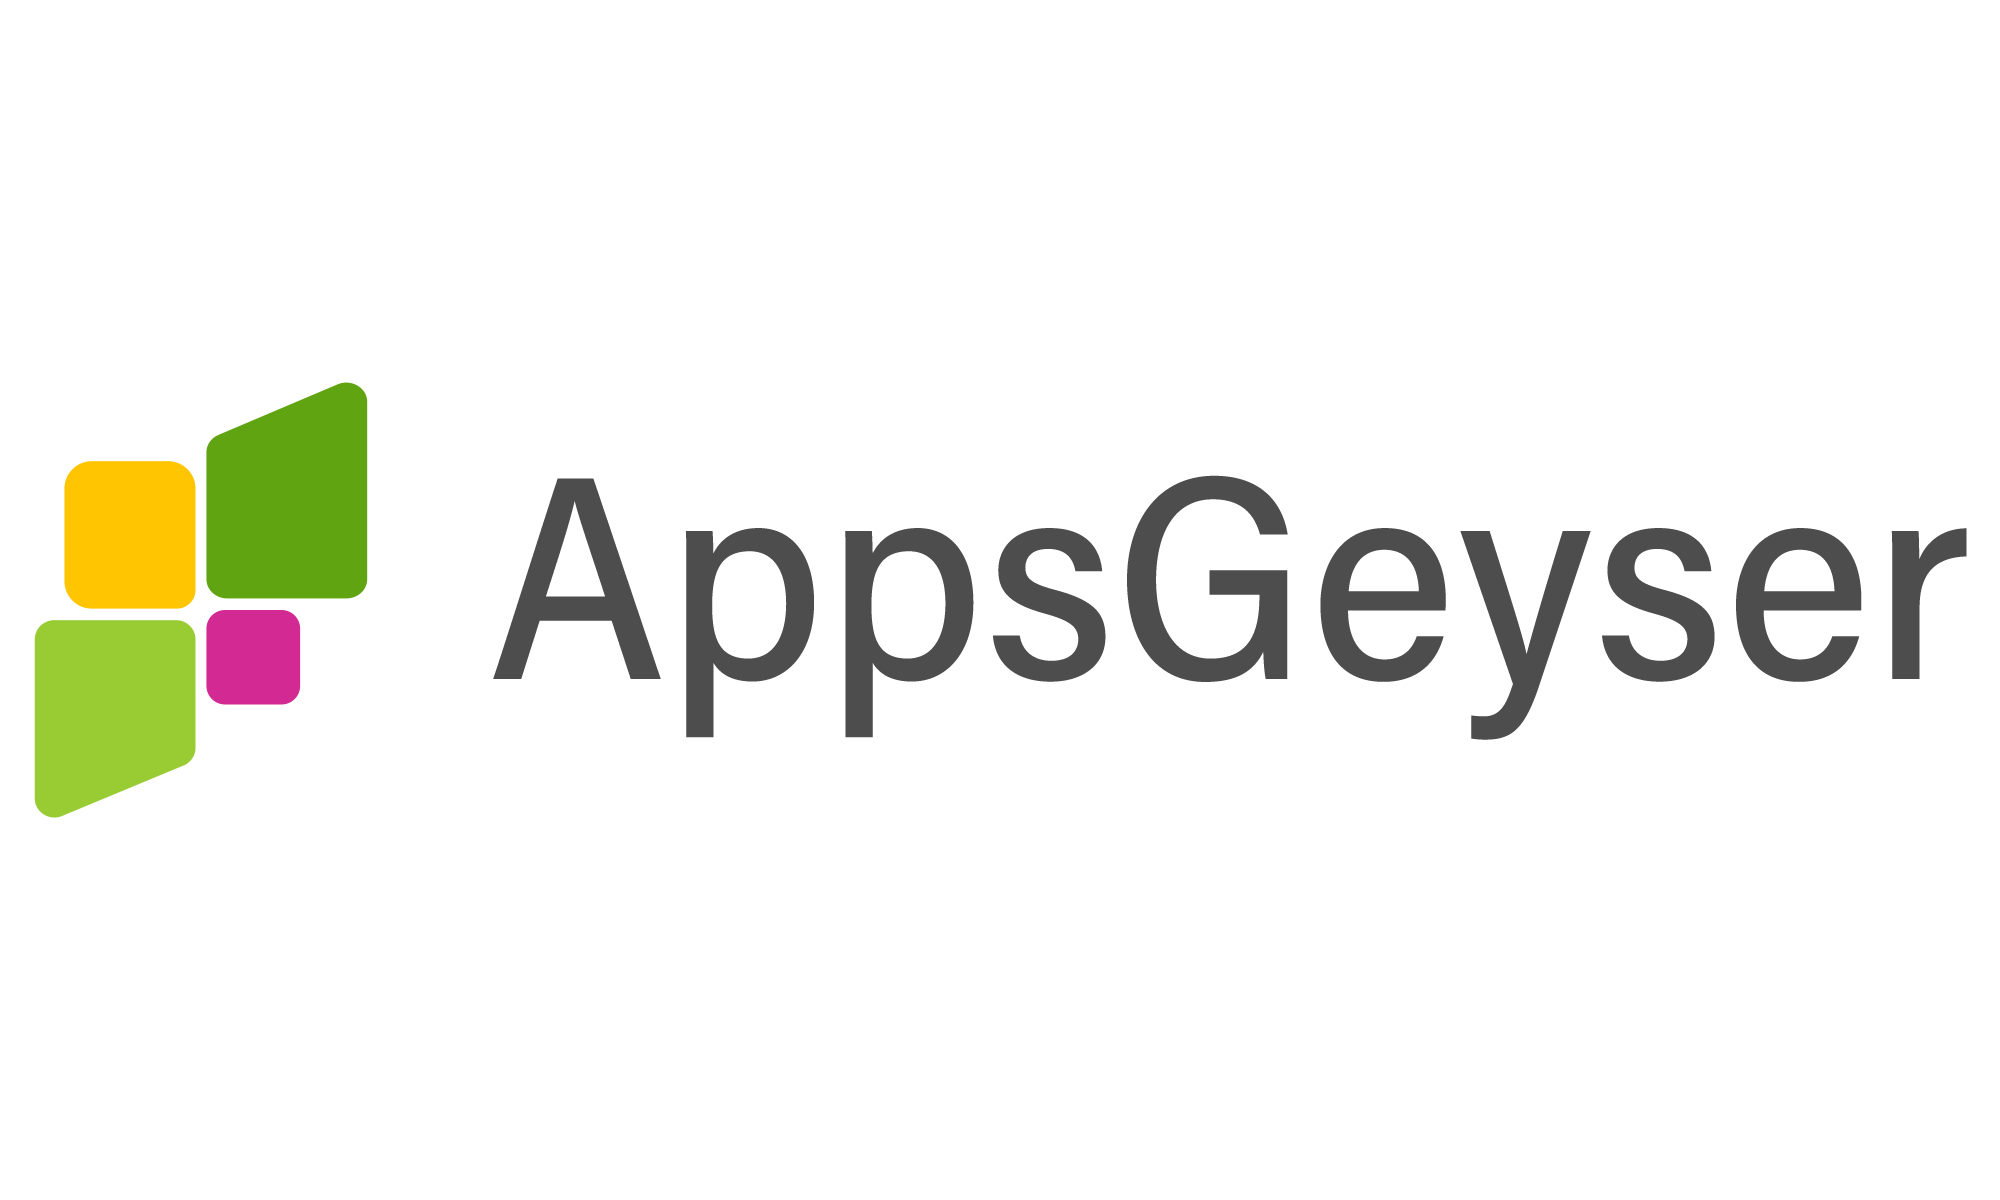 AppsGeyser: Building Apps Without Coding